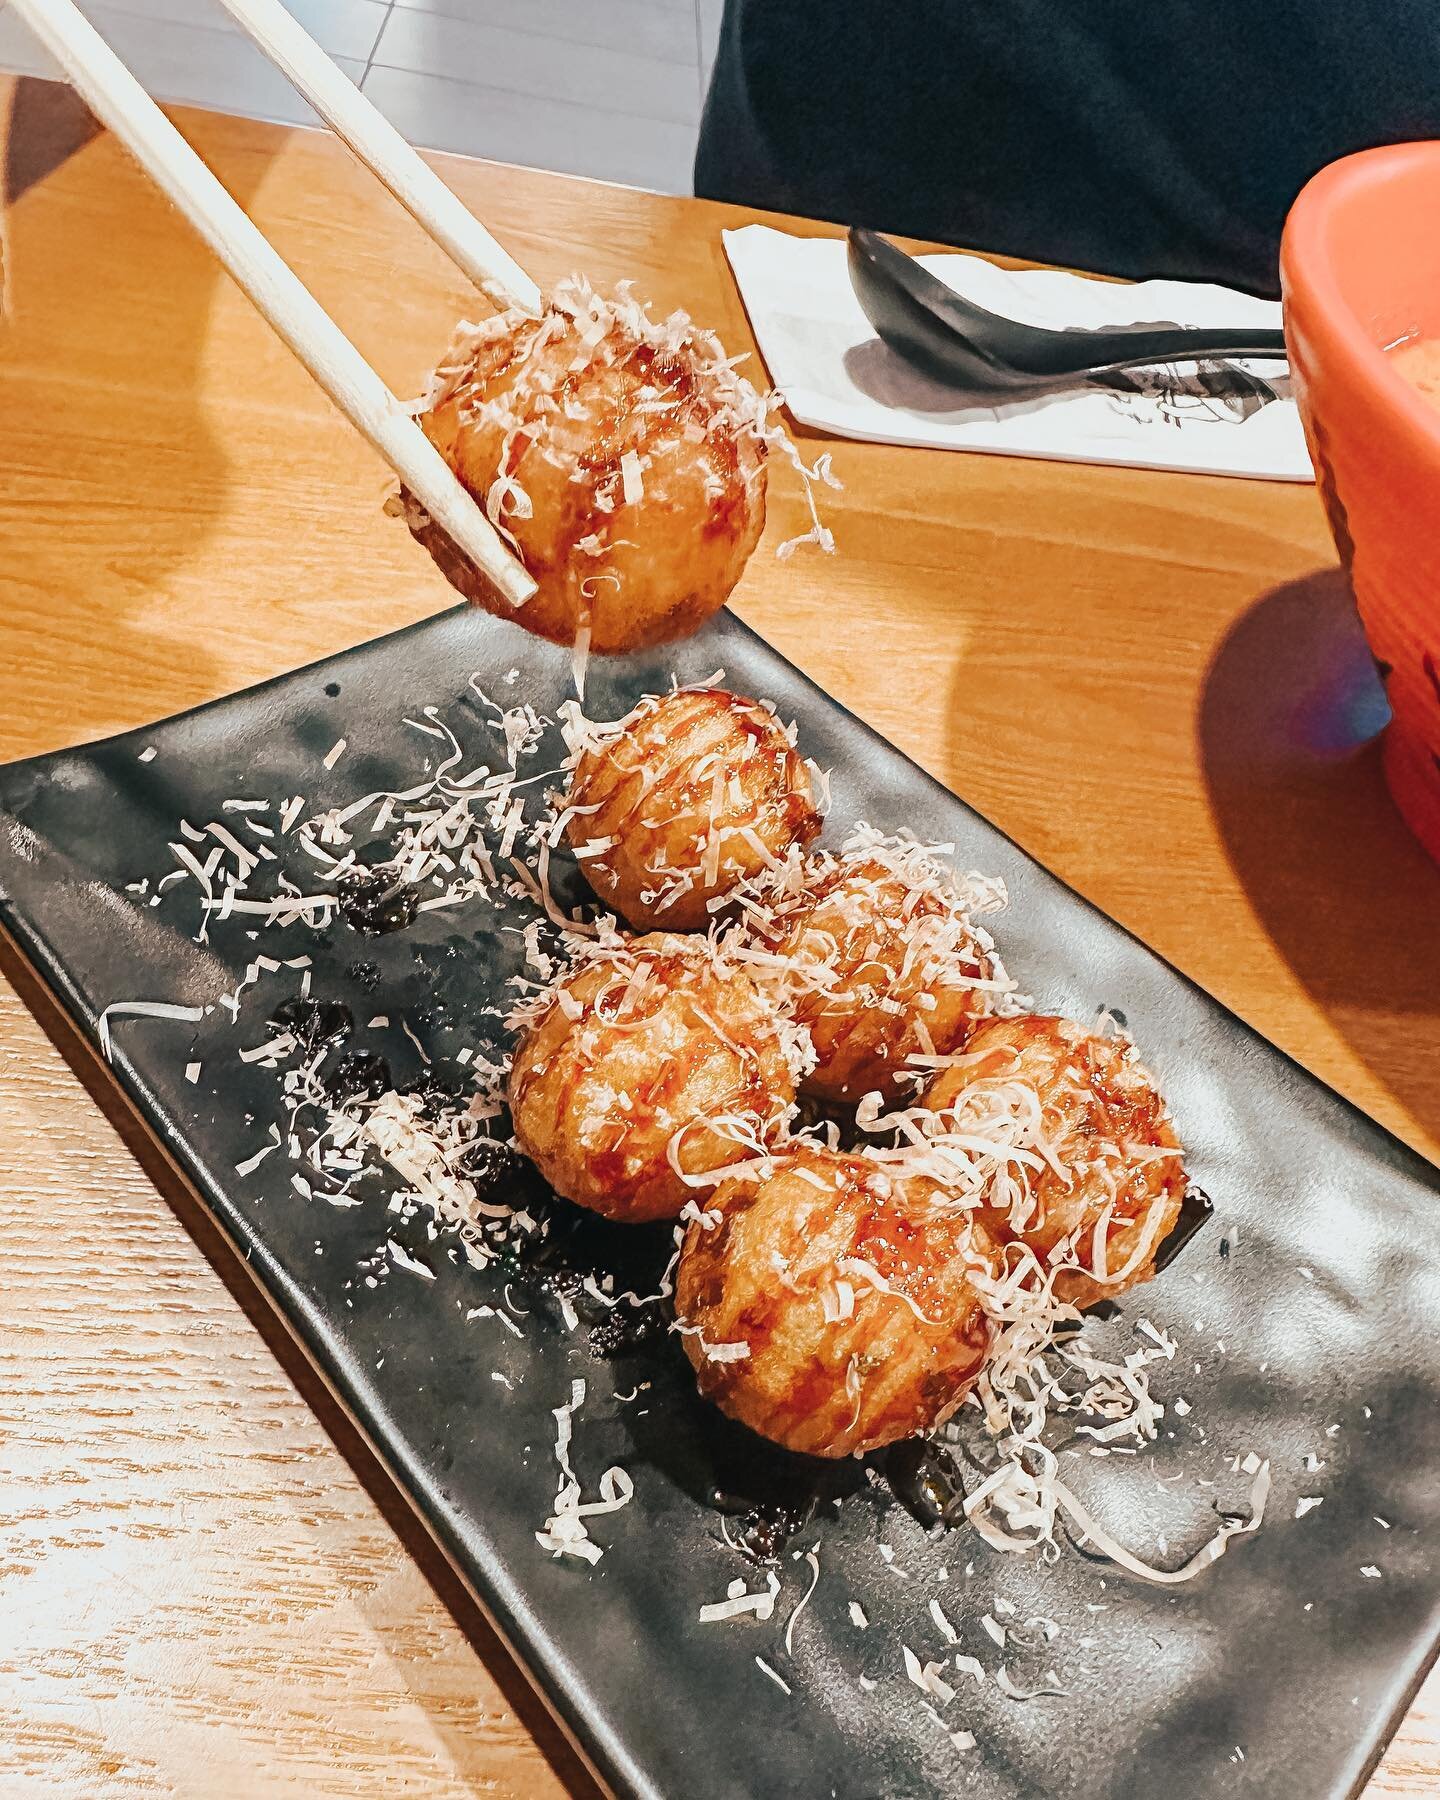 Our Takoyaki is a hit with our customers! Some described it as a delicious ball of heaven 😇 We love that description! 

Give this and our other menu items a try when you stop by! Find a location near you by clicking the link in our bio! 

#takoyaki 